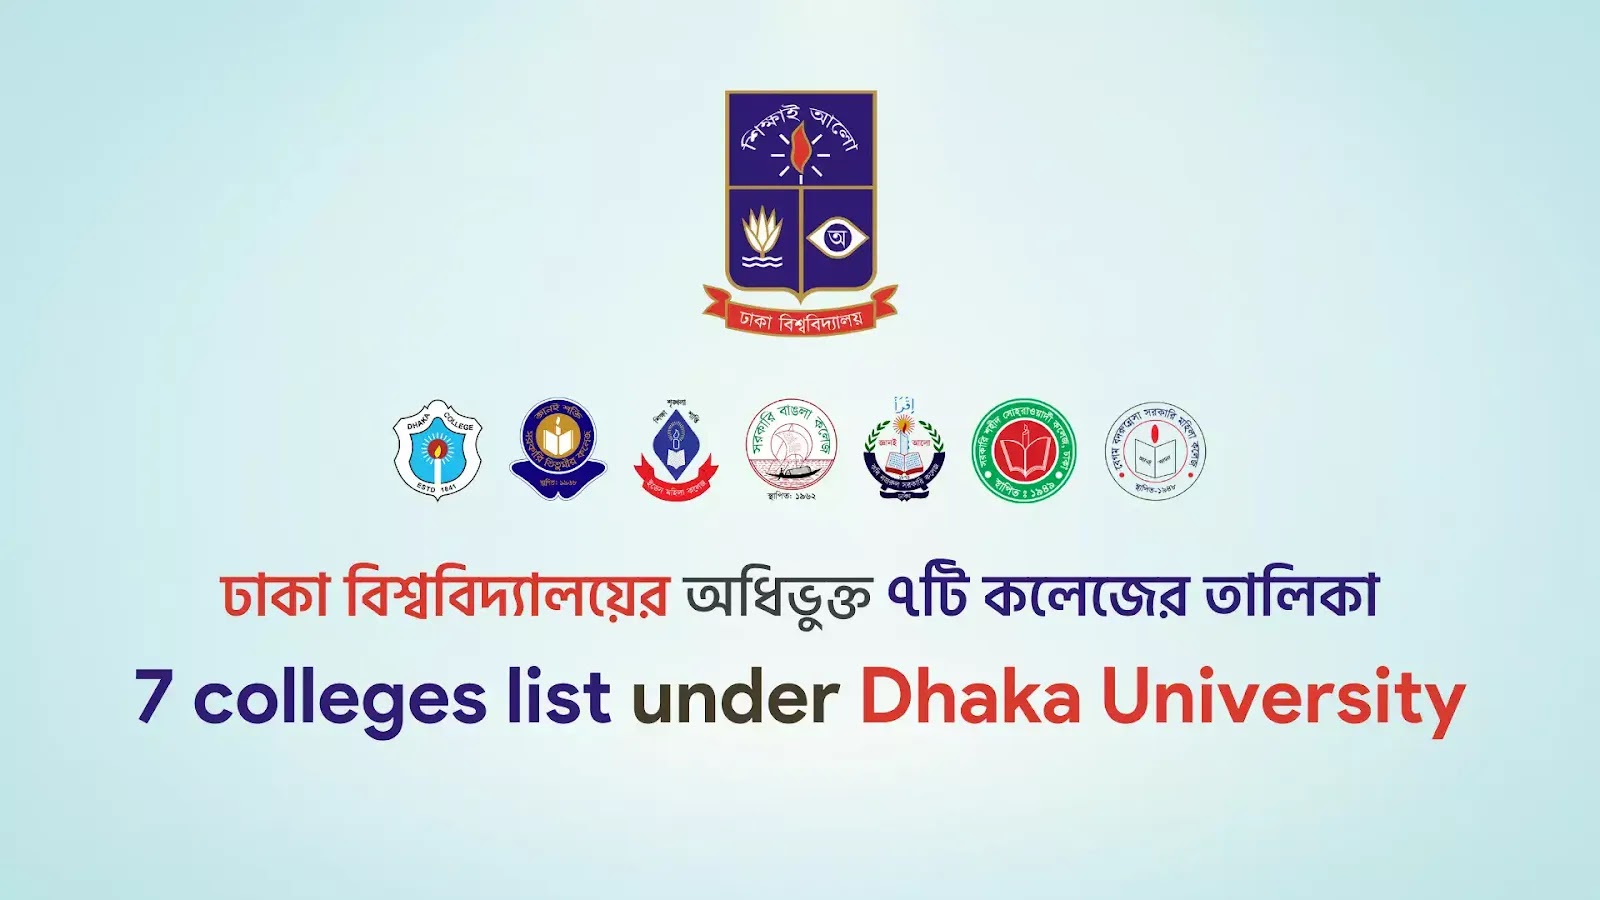 Top 7 Colleges Under Dhaka University